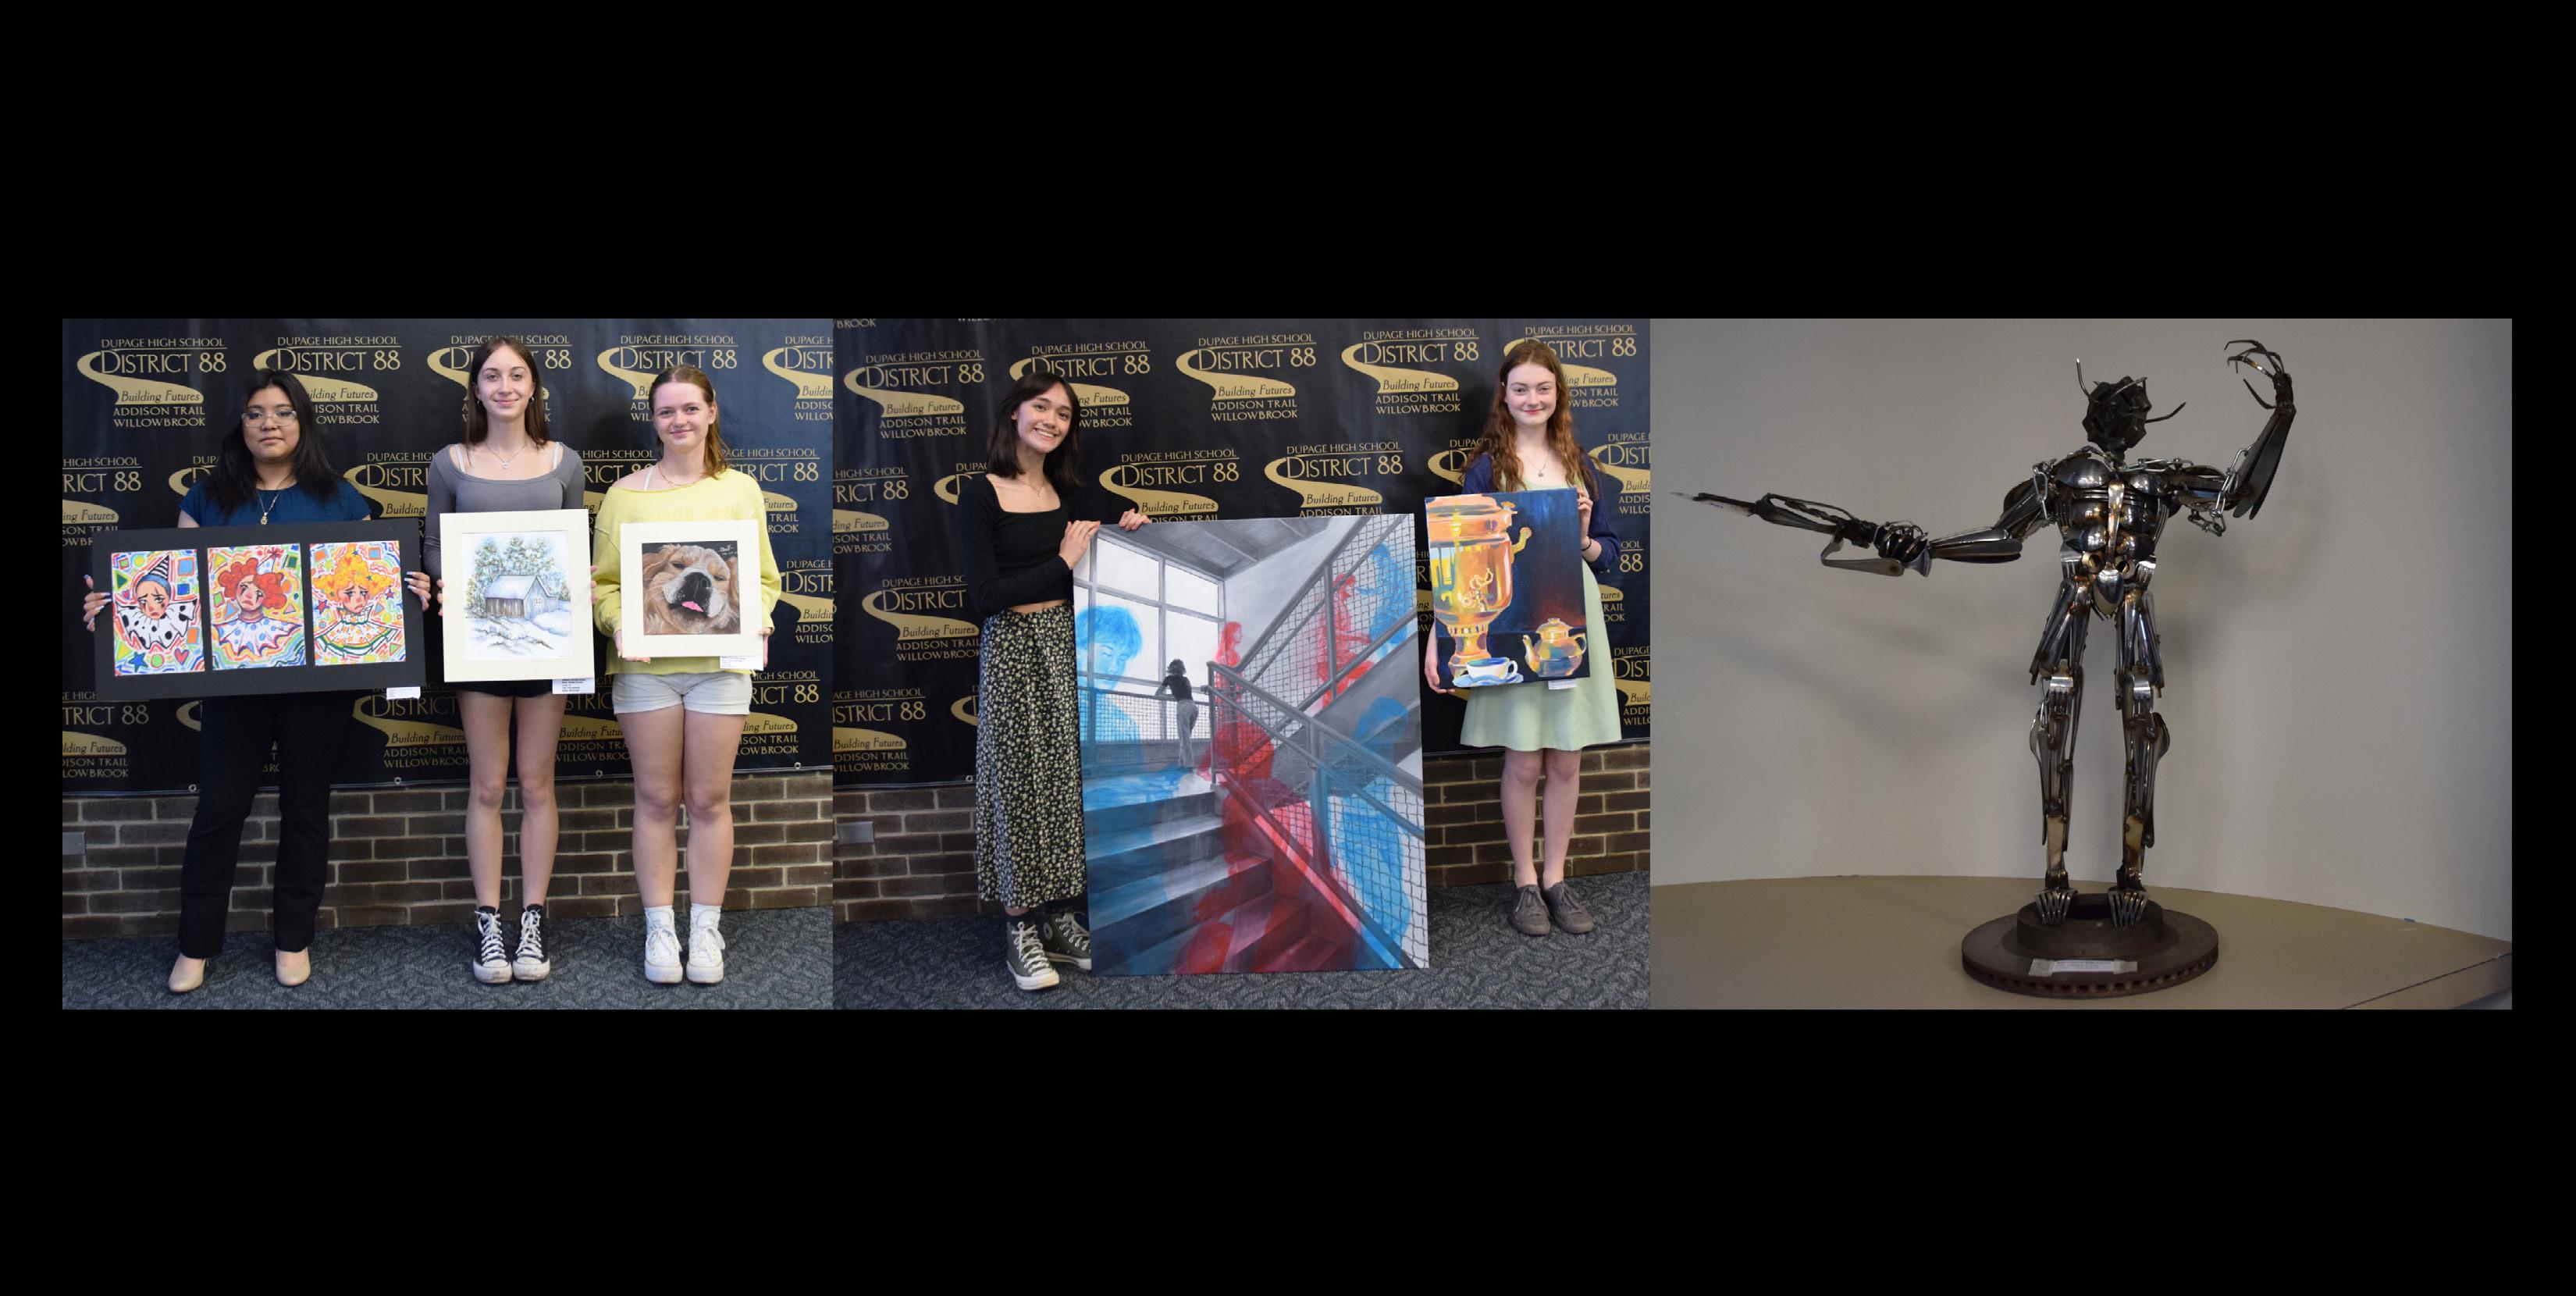 Six students named as District 88 Art Scholarship recipients